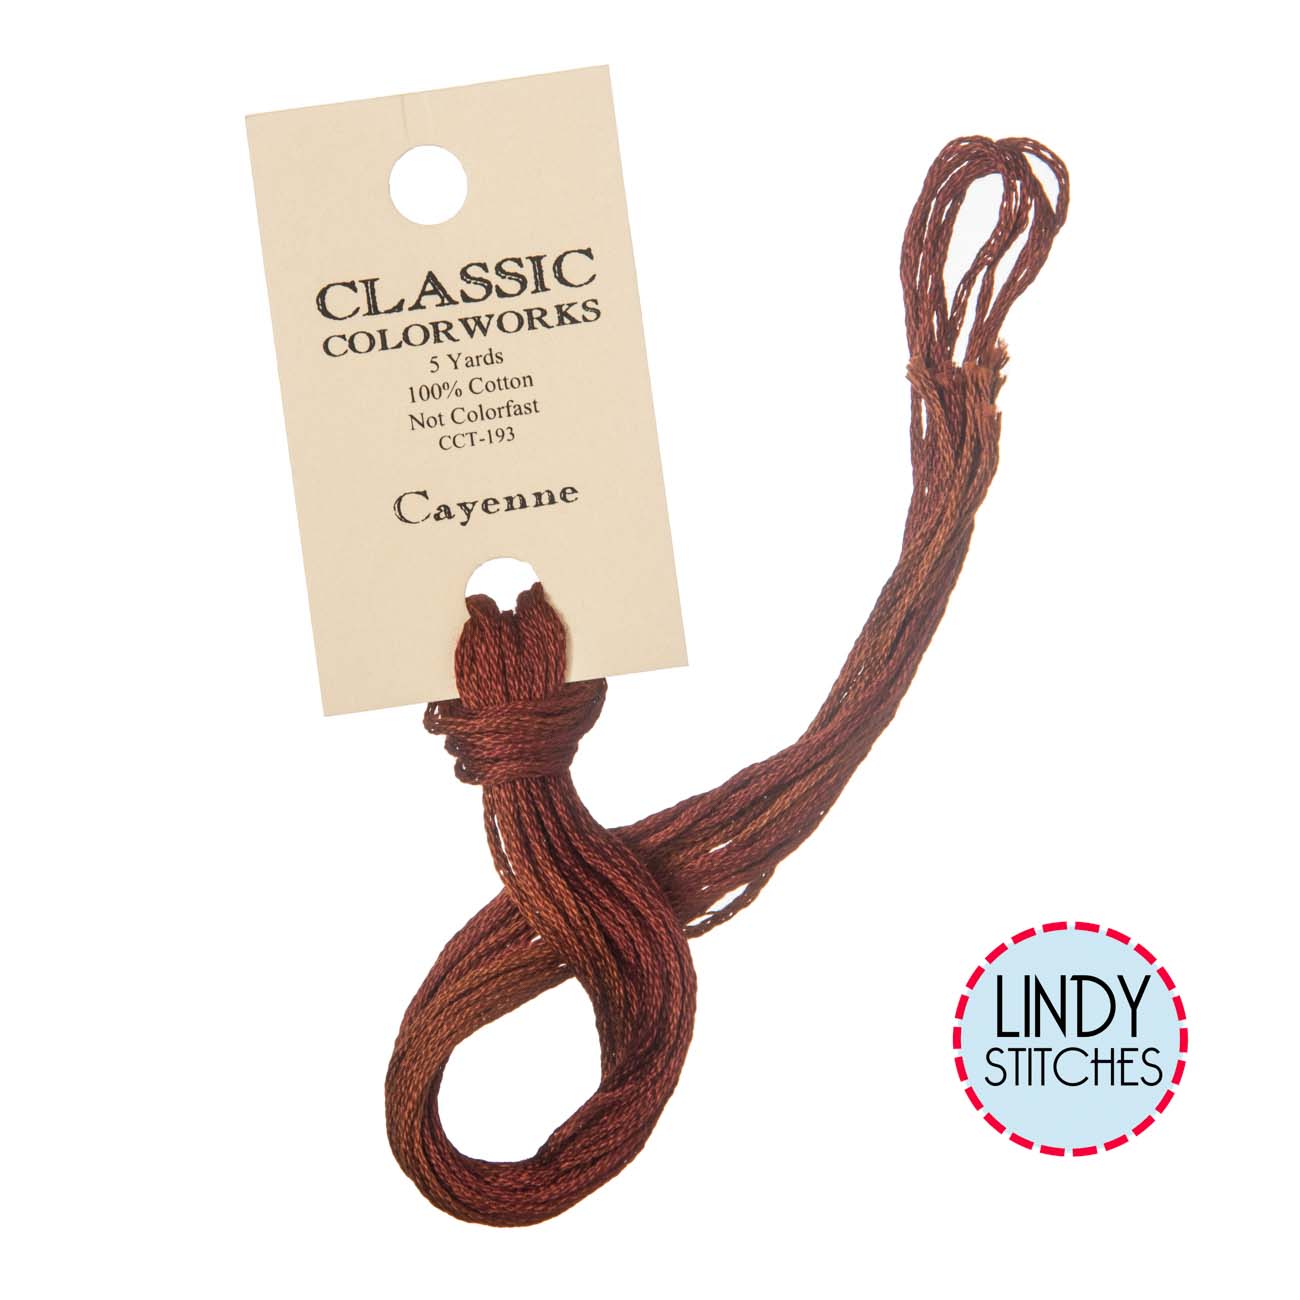 Cayenne Classic Colorworks Floss Hand Dyed Cotton Skein